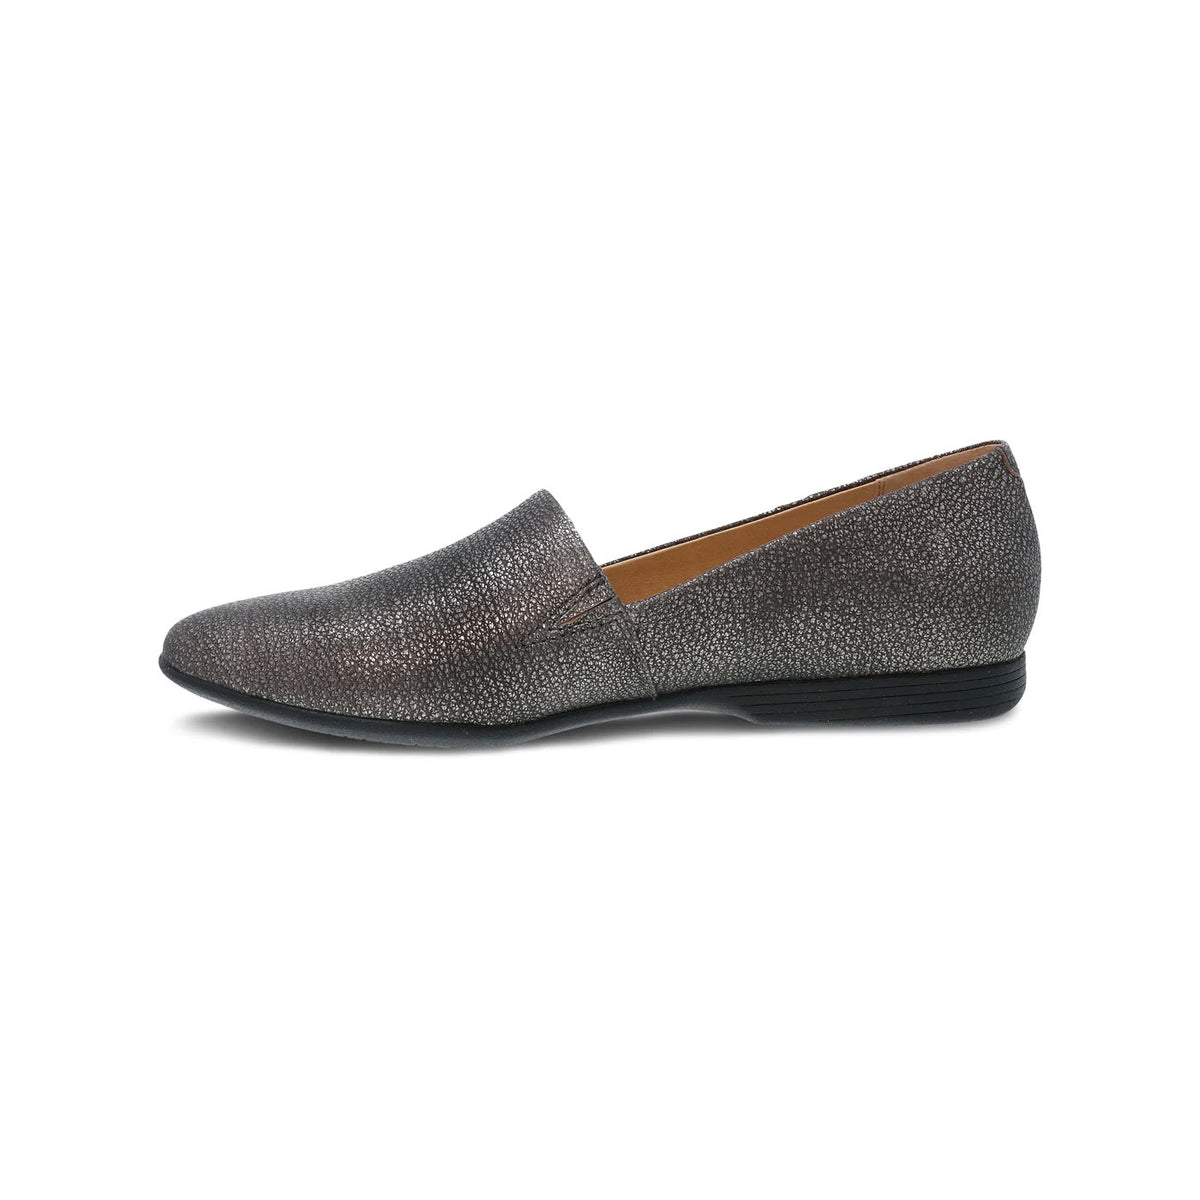 Side view of a DANSKO Larisa Pewter Metallic flat with a pointed toe and low heel, isolated on a white background.